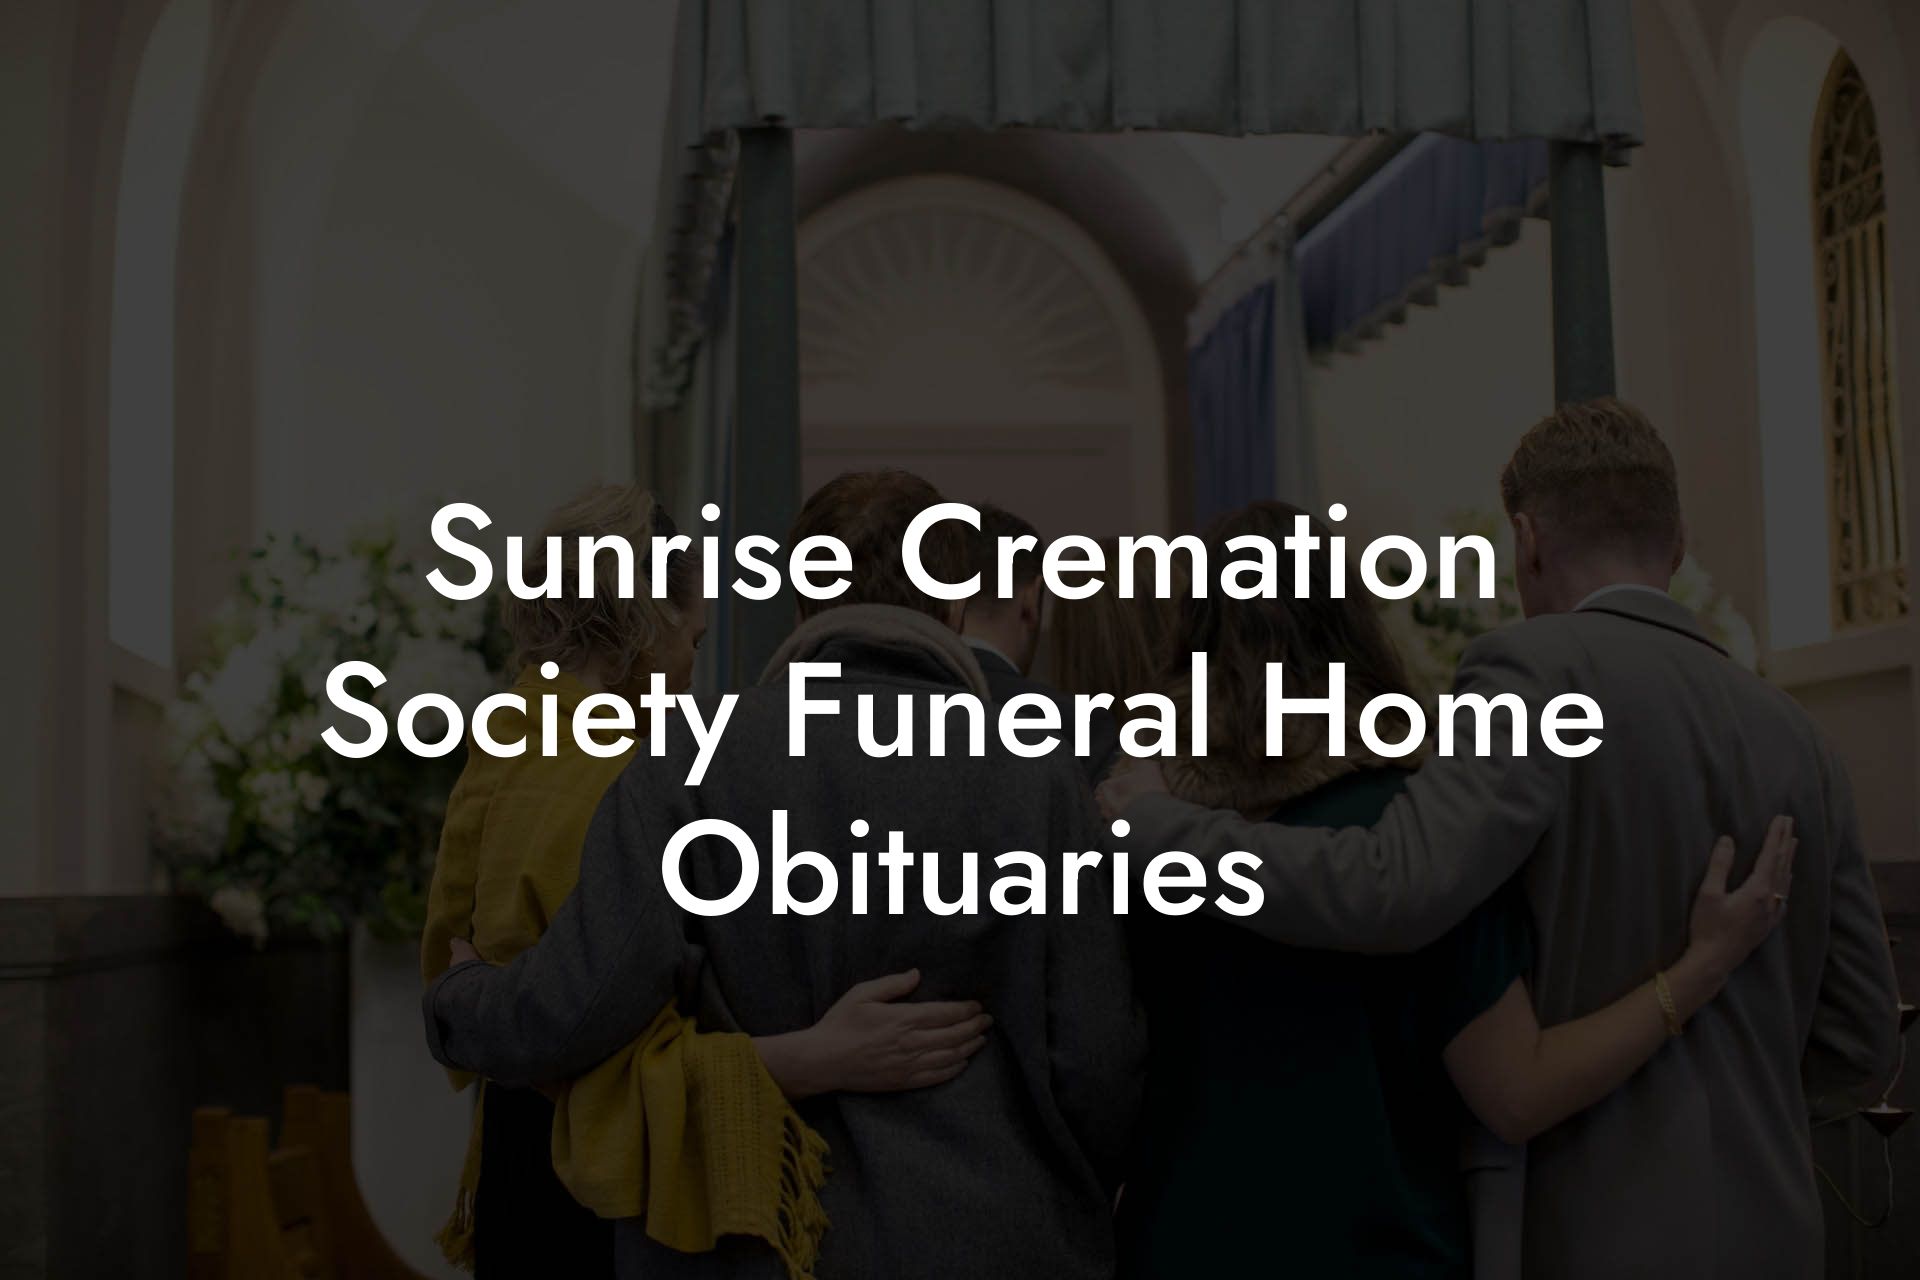 Sunrise Cremation Society Funeral Home Obituaries